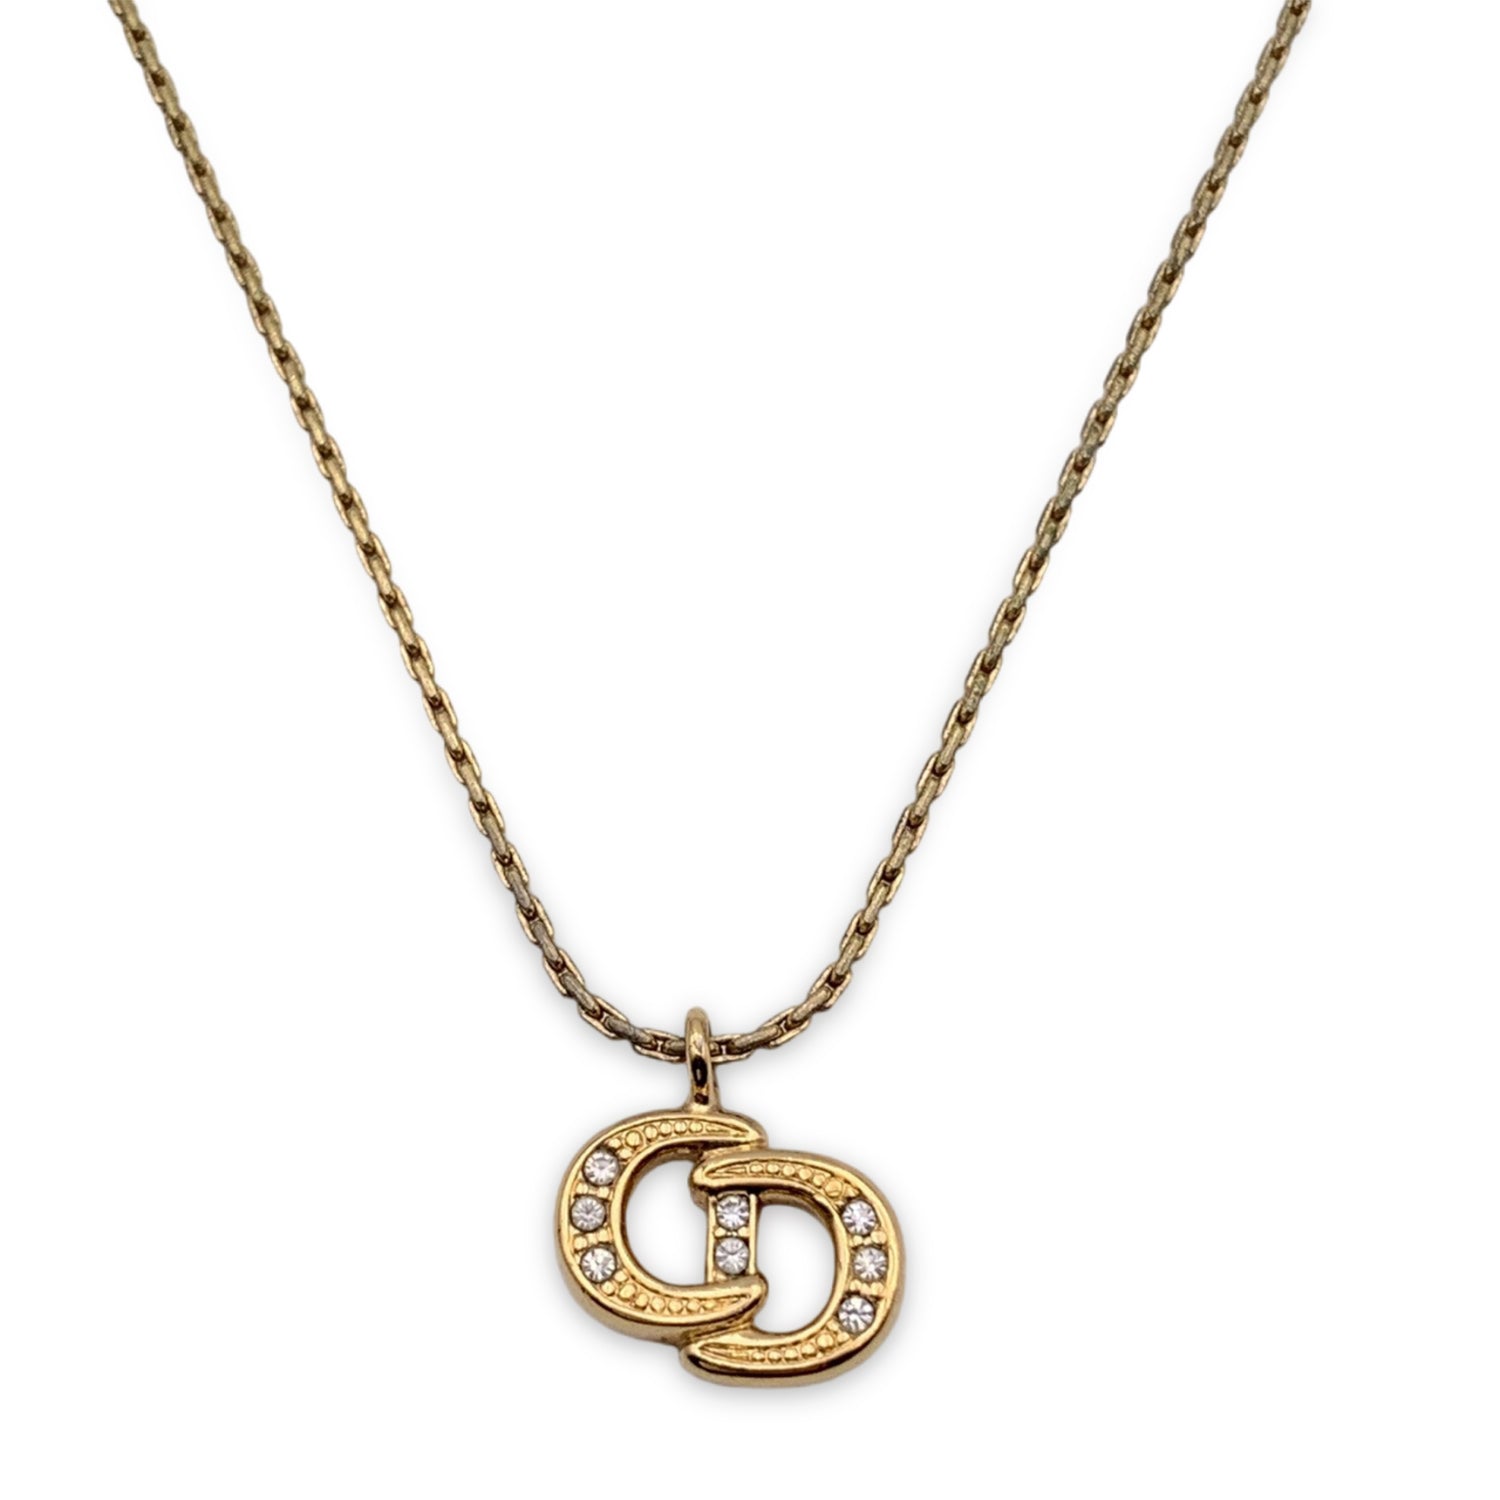 What Goes Around Comes Around Dior Gold Crystal Cd Necklace | Shopbop